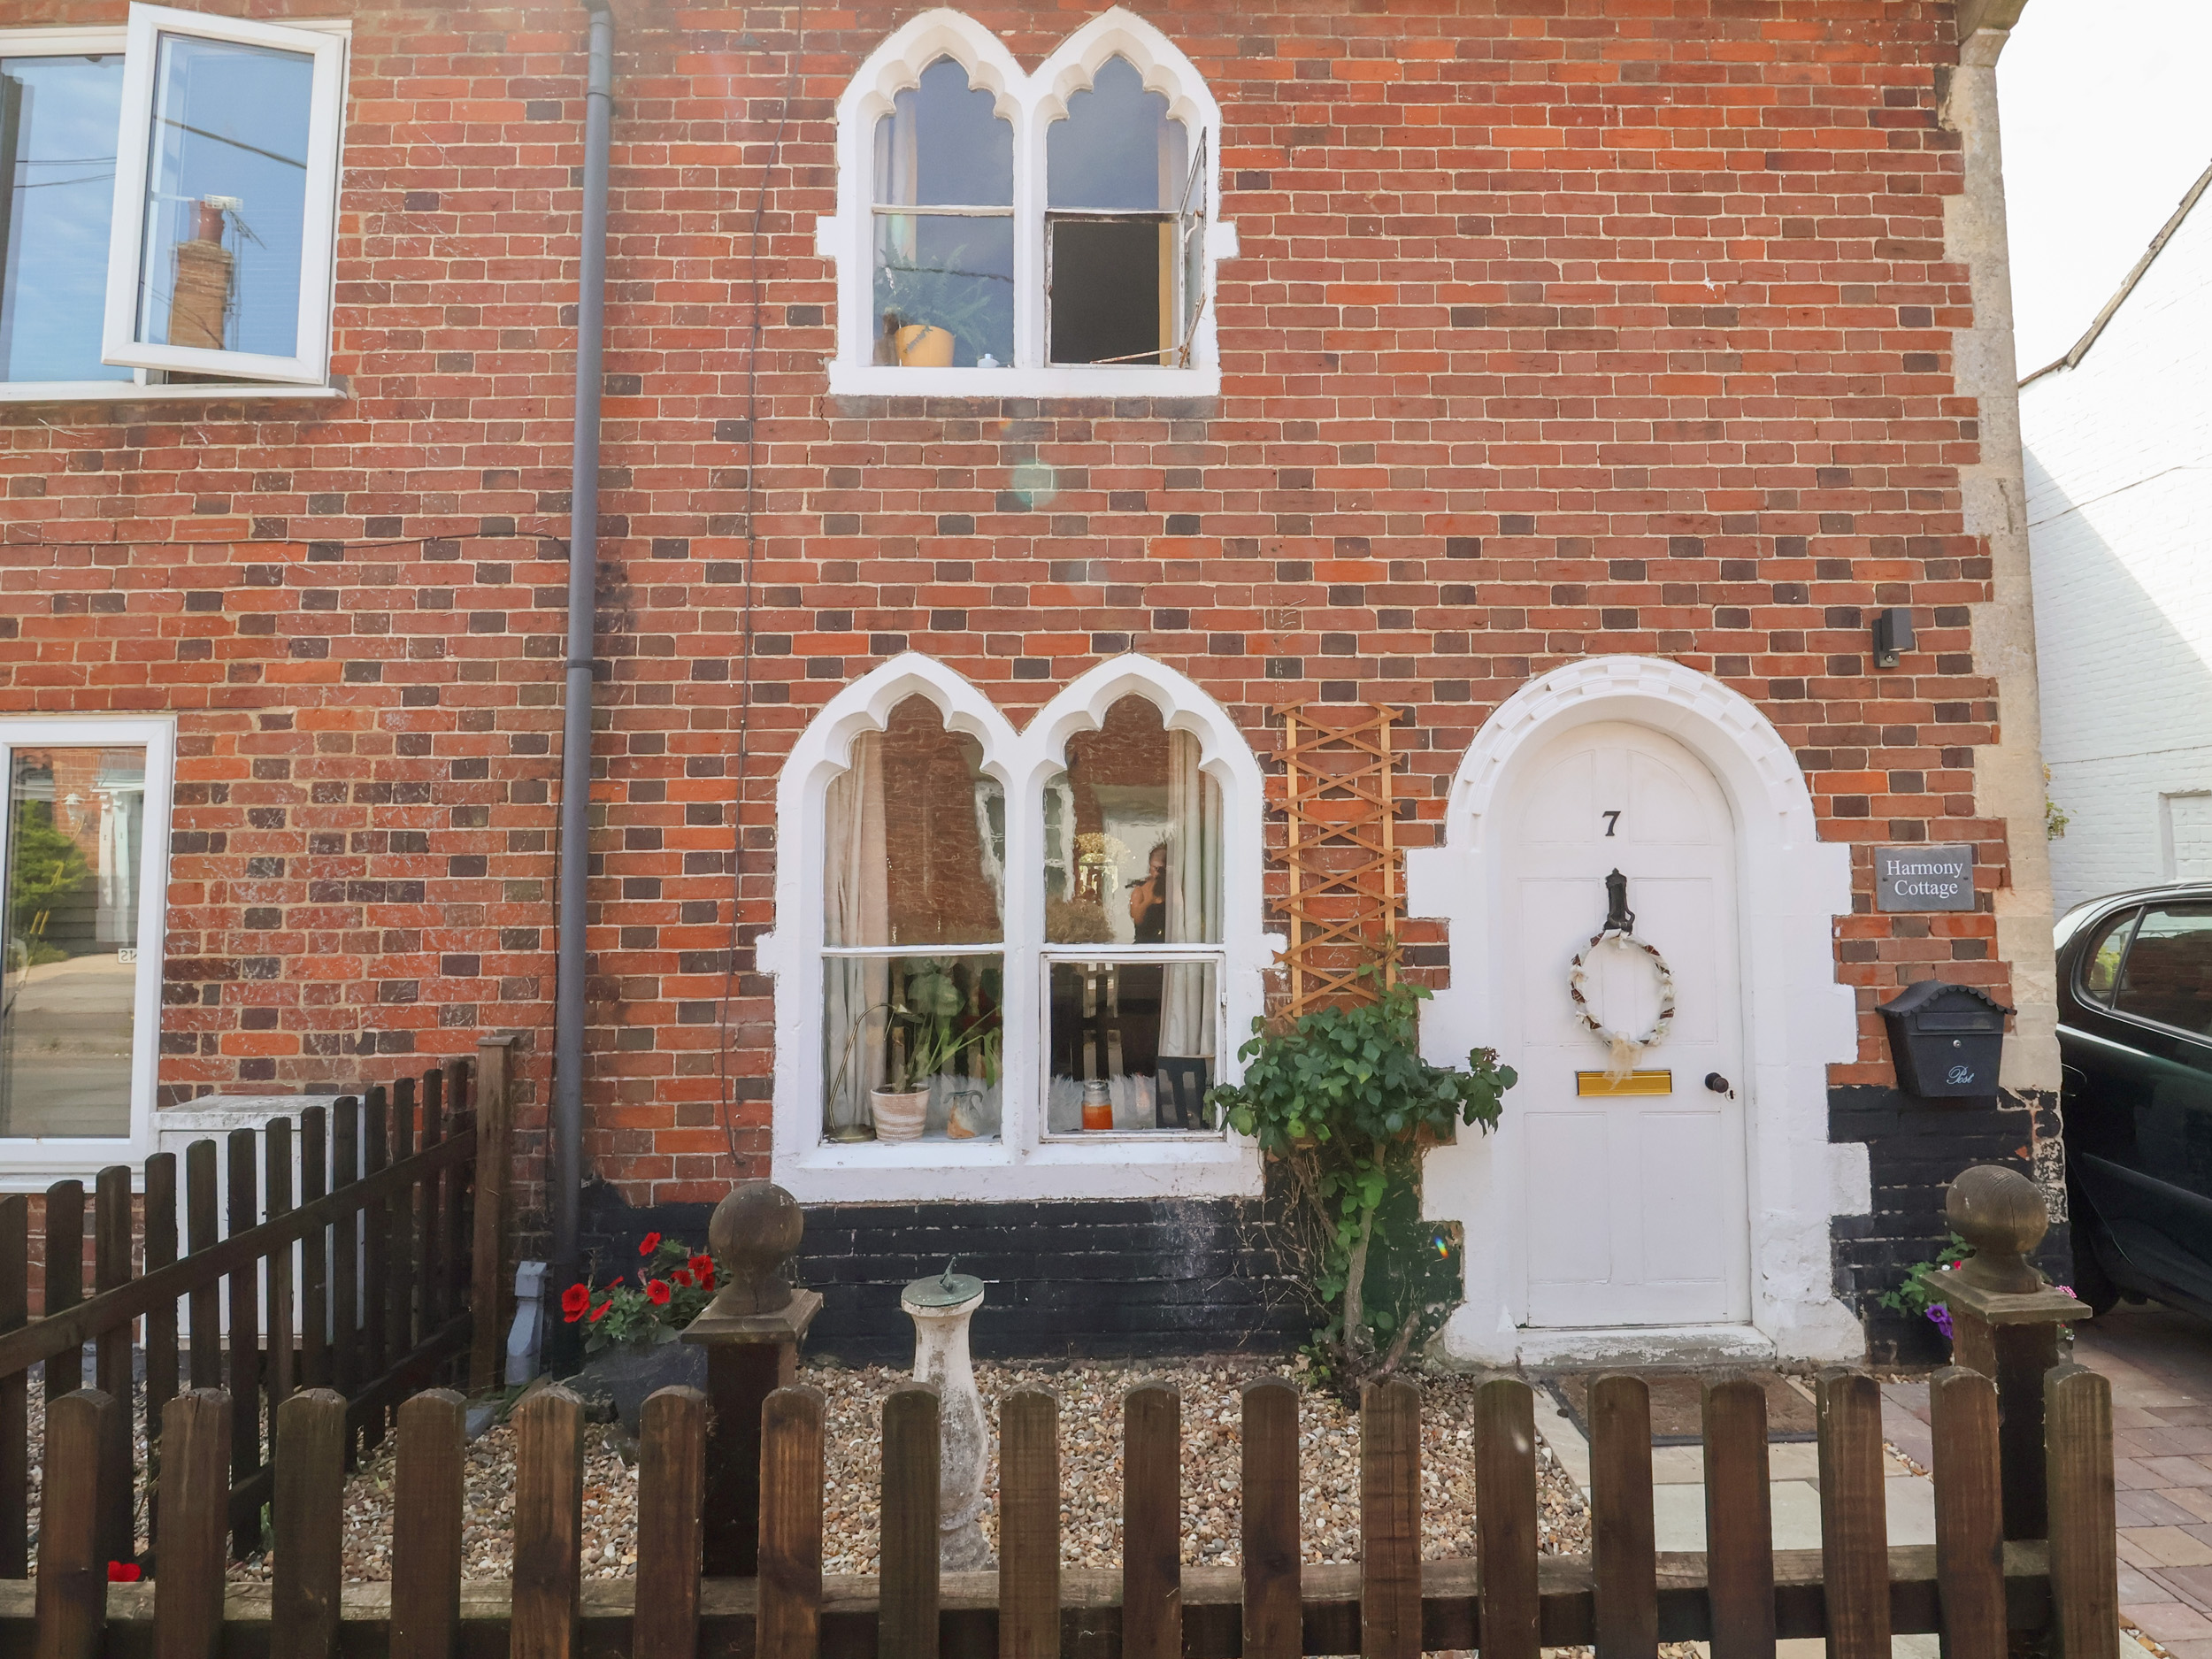 1 bedroom Cottage for rent in Bungay